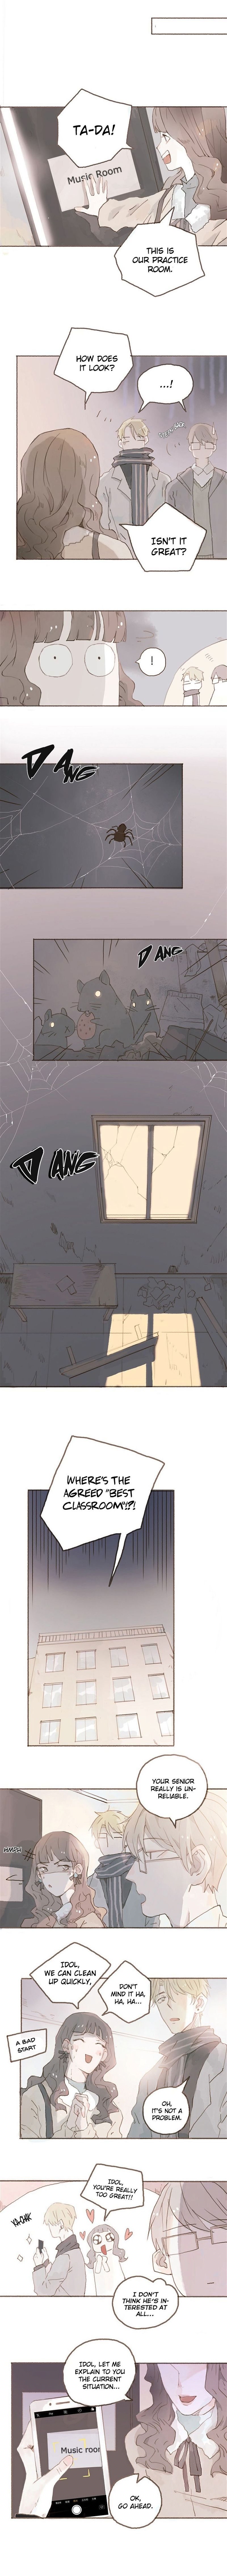 Finally Living Together With my Anti-Fan Chapter 18 page 3